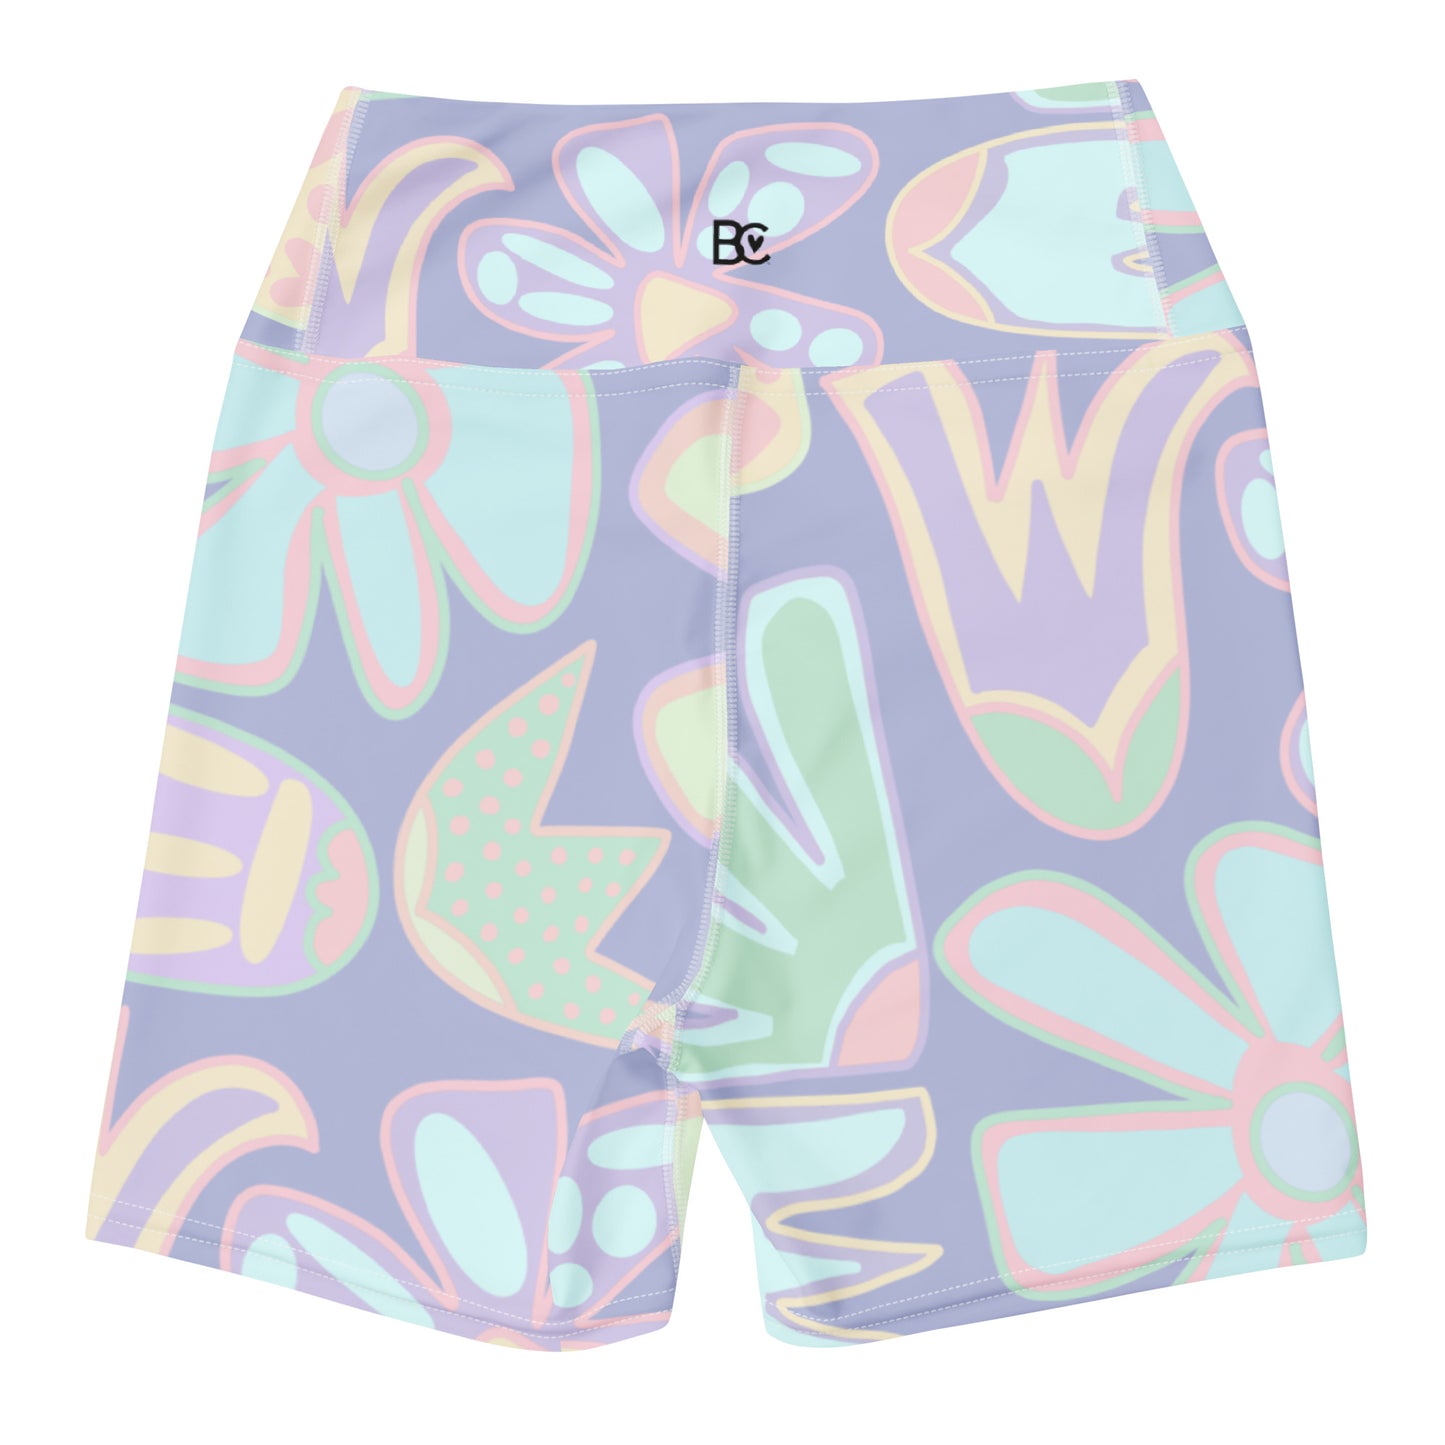 BC Easter Limited Edition Yoga Training Shorts Squat Proof